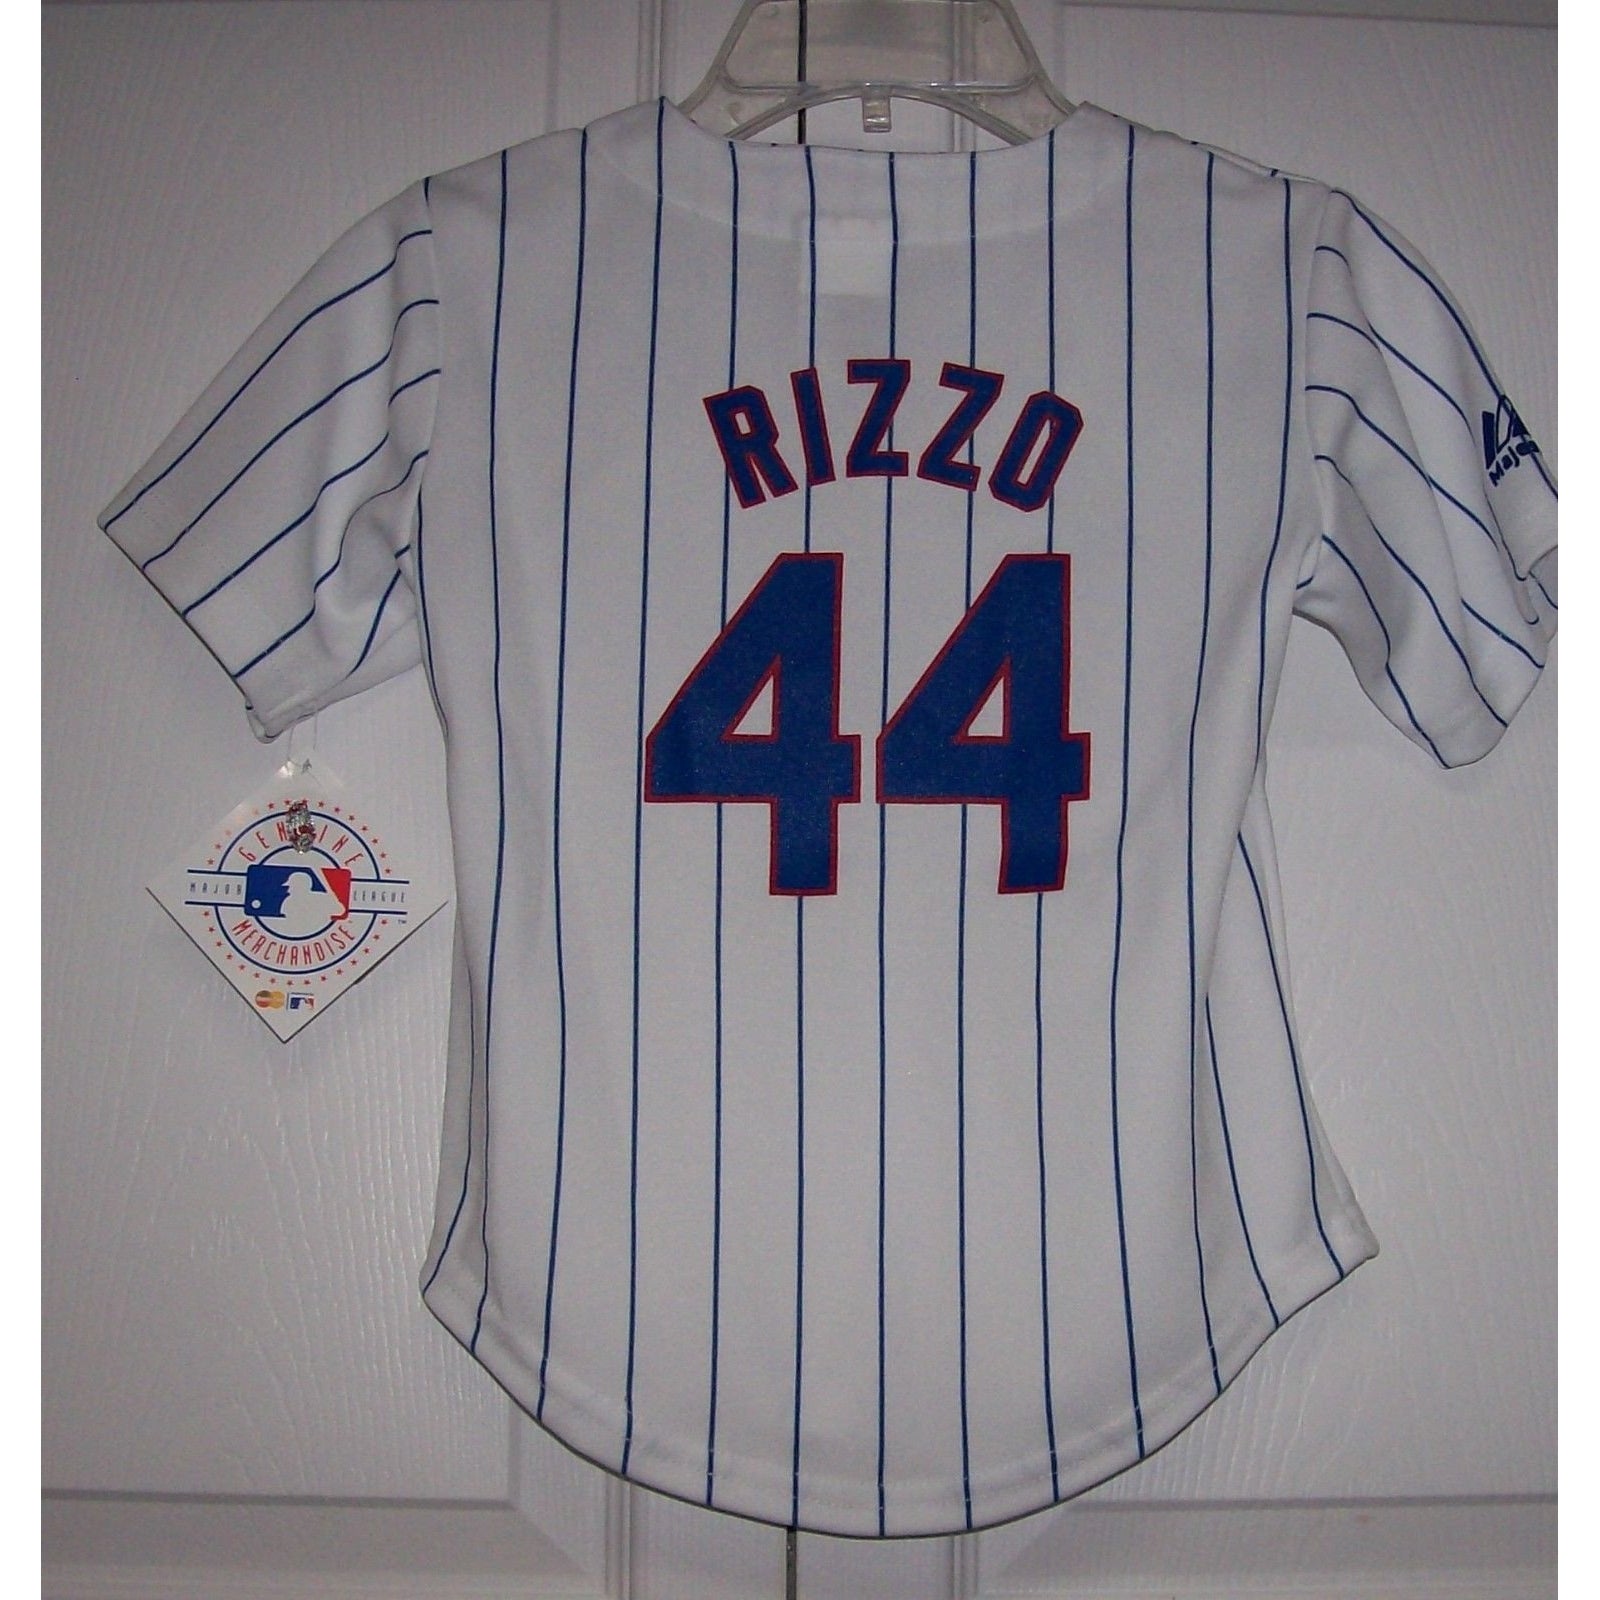 RIZZO Chicago Cubs BOYS Majestic MLB Baseball jersey HOME White